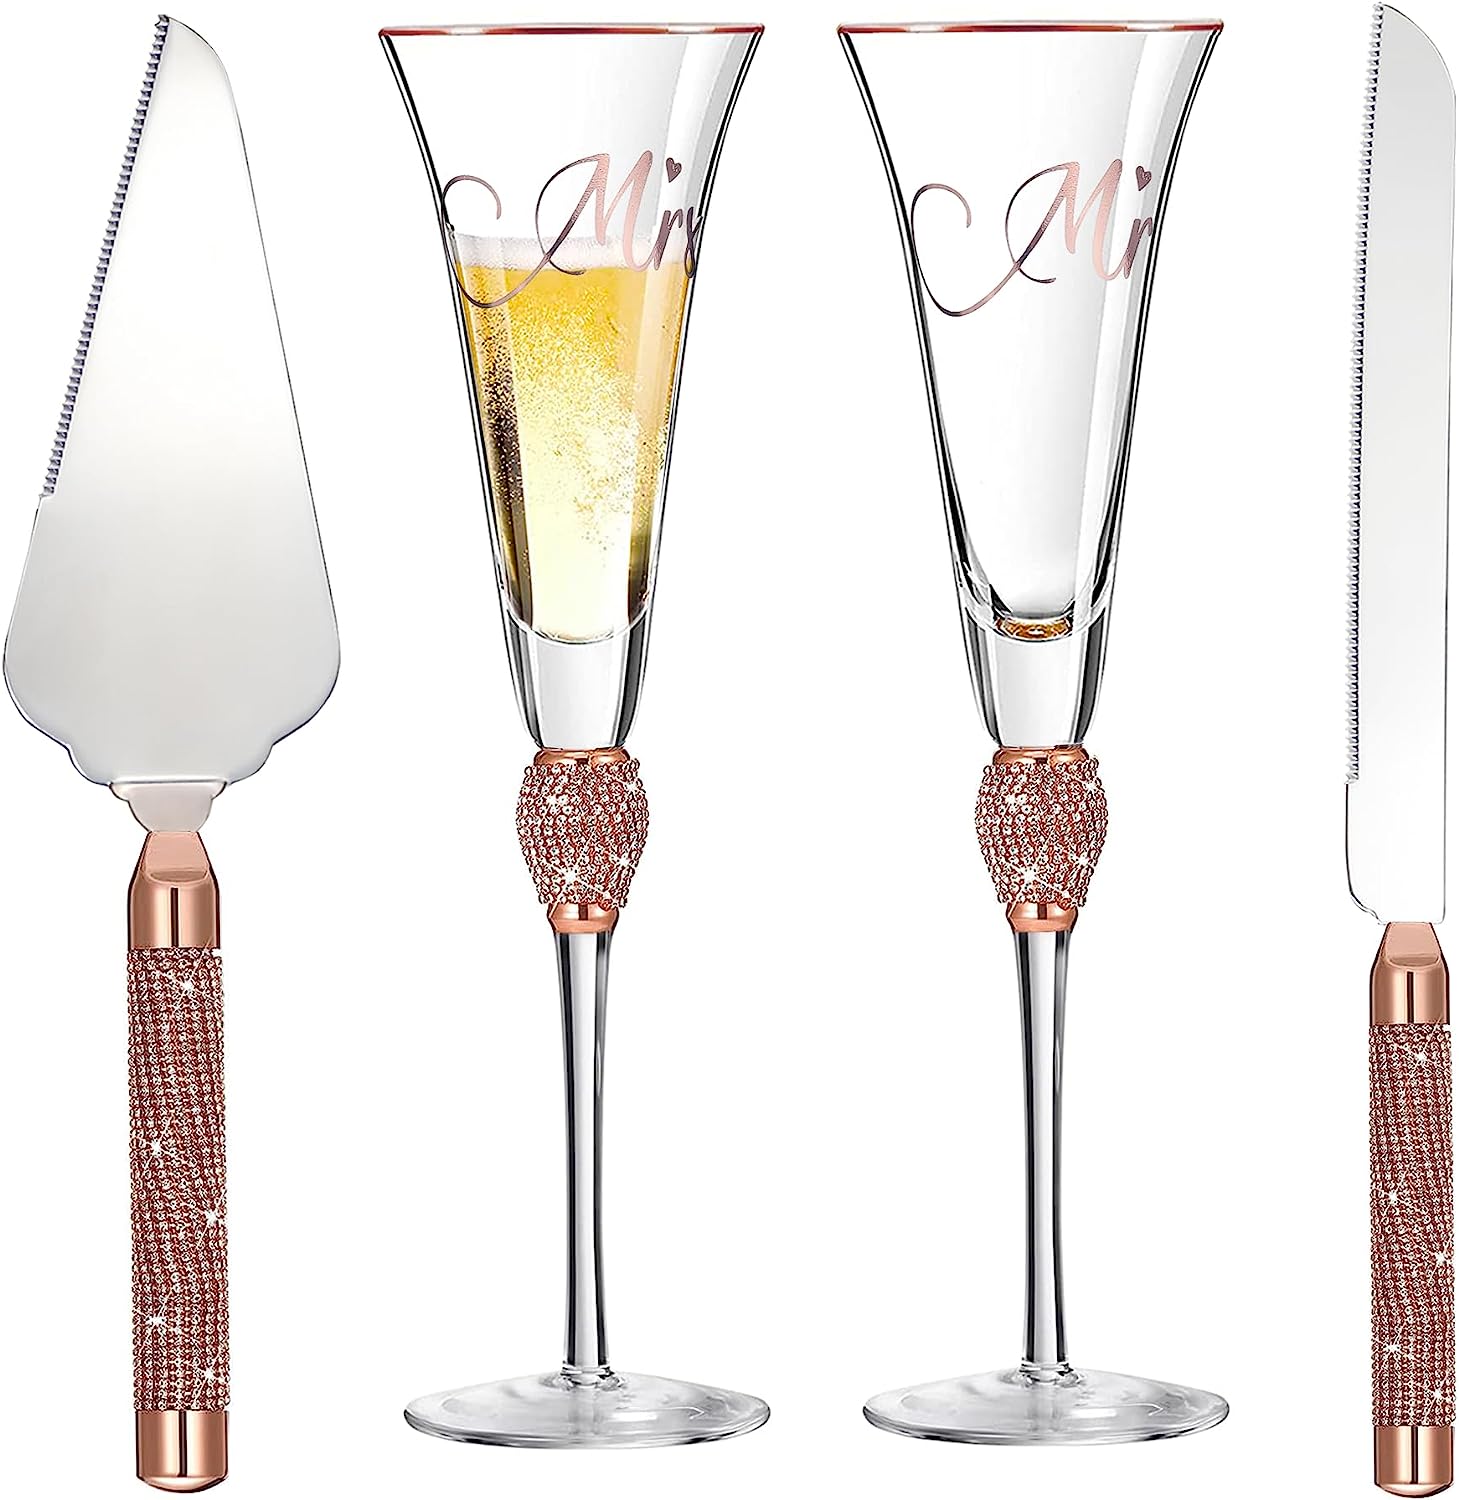 Champagne Flutes, Wedding Cake Knife and Server Set, Toasting Champagne Glasses with Gold Rim Rhinestone Studded Engraved Mr and Mrs, Couple Bride and Groom Wedding & Engagement gift - VARLKA